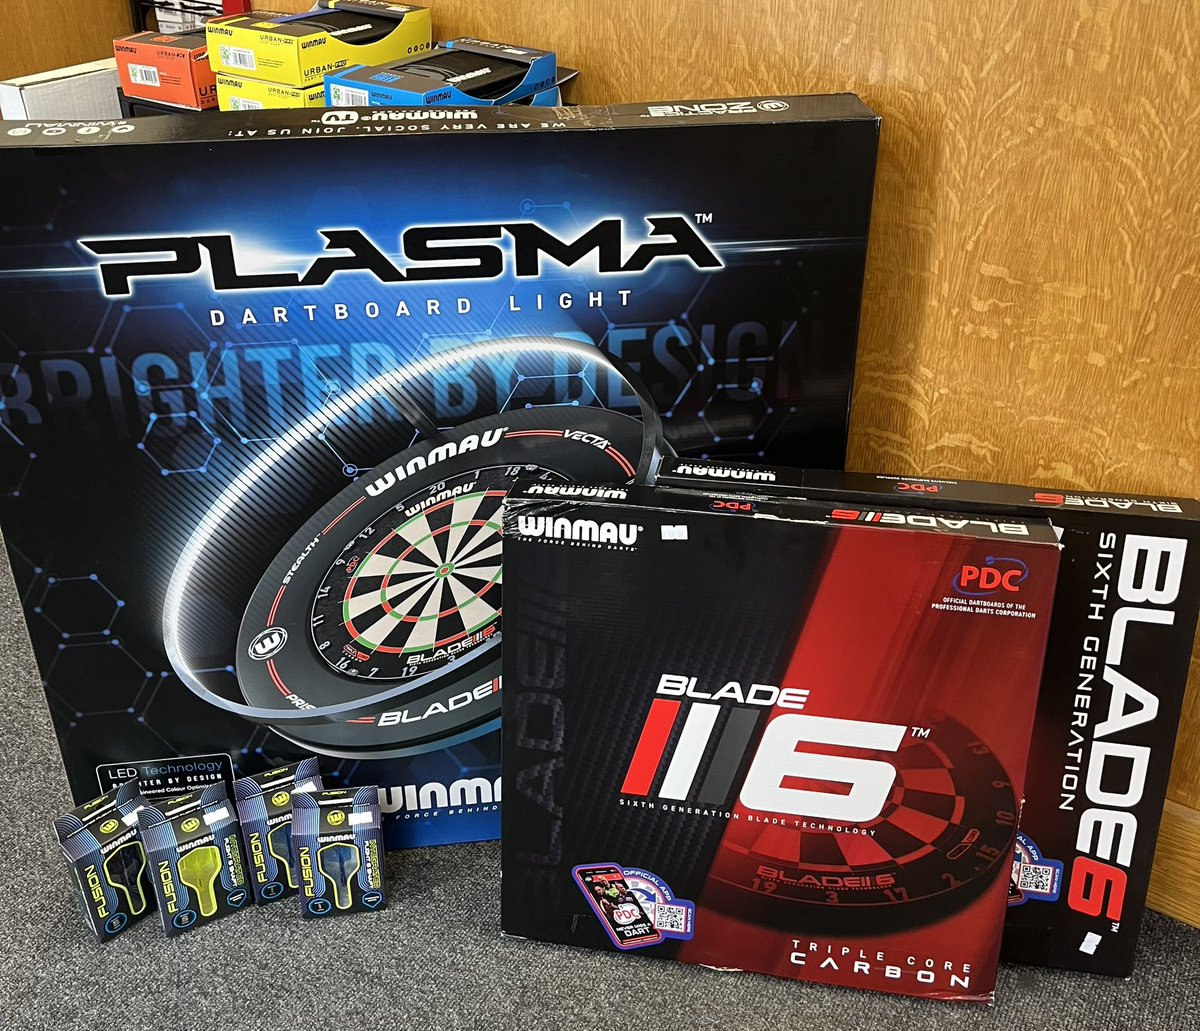 ‼️BACK IN STOCK‼️‼️

Winmau Blade 6 dartboards are finally back in stock at Sportsbug!🤩

- Blade 6 Dartboards 
- Blade 6 Triple Core Dartboards
- Surrounds 
- Plasma Dartboard Lights 
- Fusion Flight and Shafts
- PLENTY of darts and accessories to choose from! 

#winmau #blade6